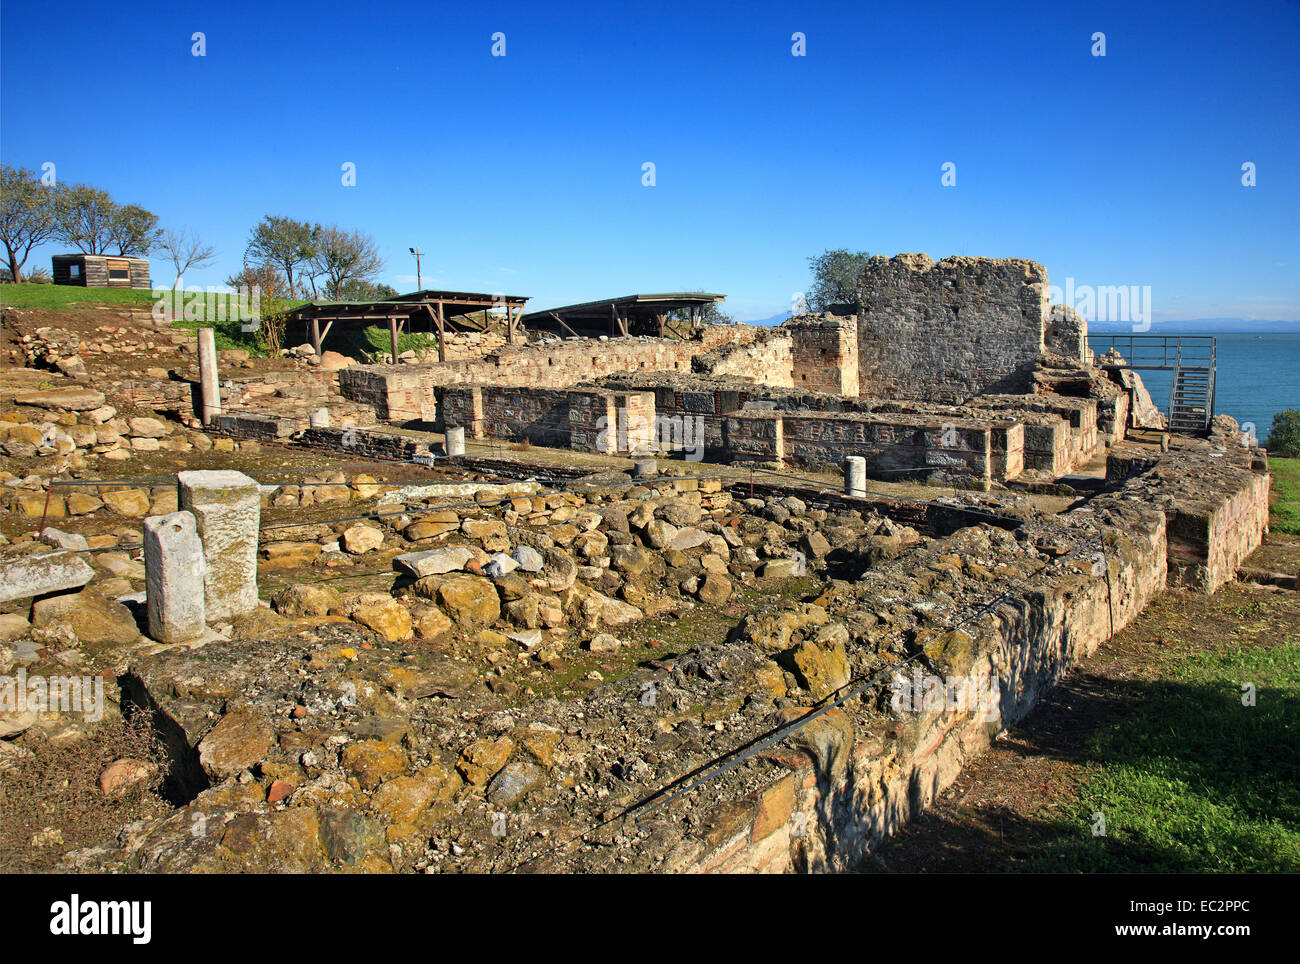 At the archaeological site of Ancient Pydna, Pieria, Macedonia, Greece. Stock Photo